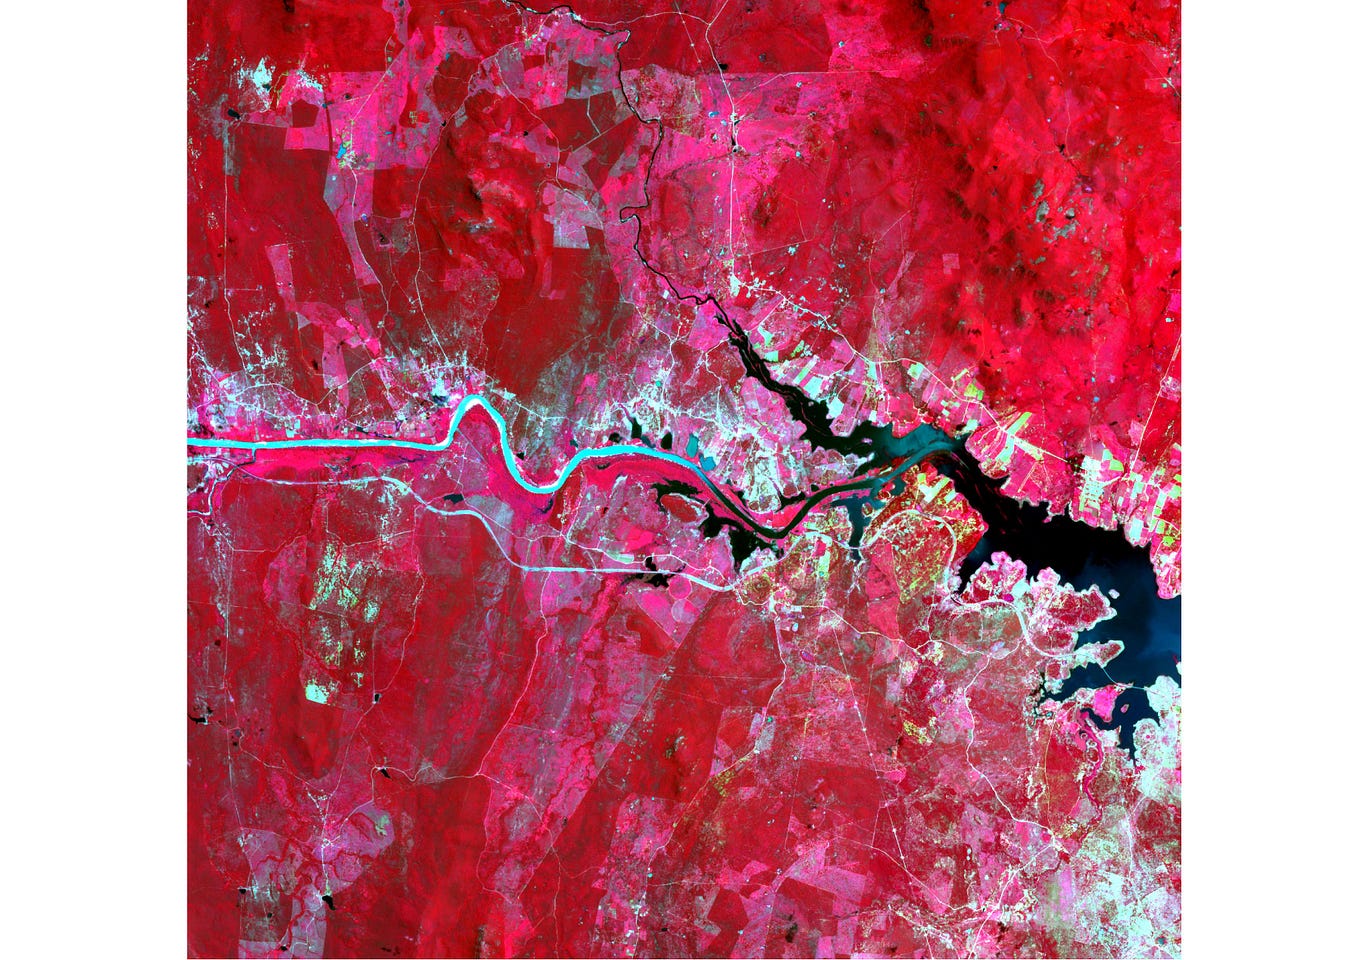 How to Download Free High-Resolution Satellite Images